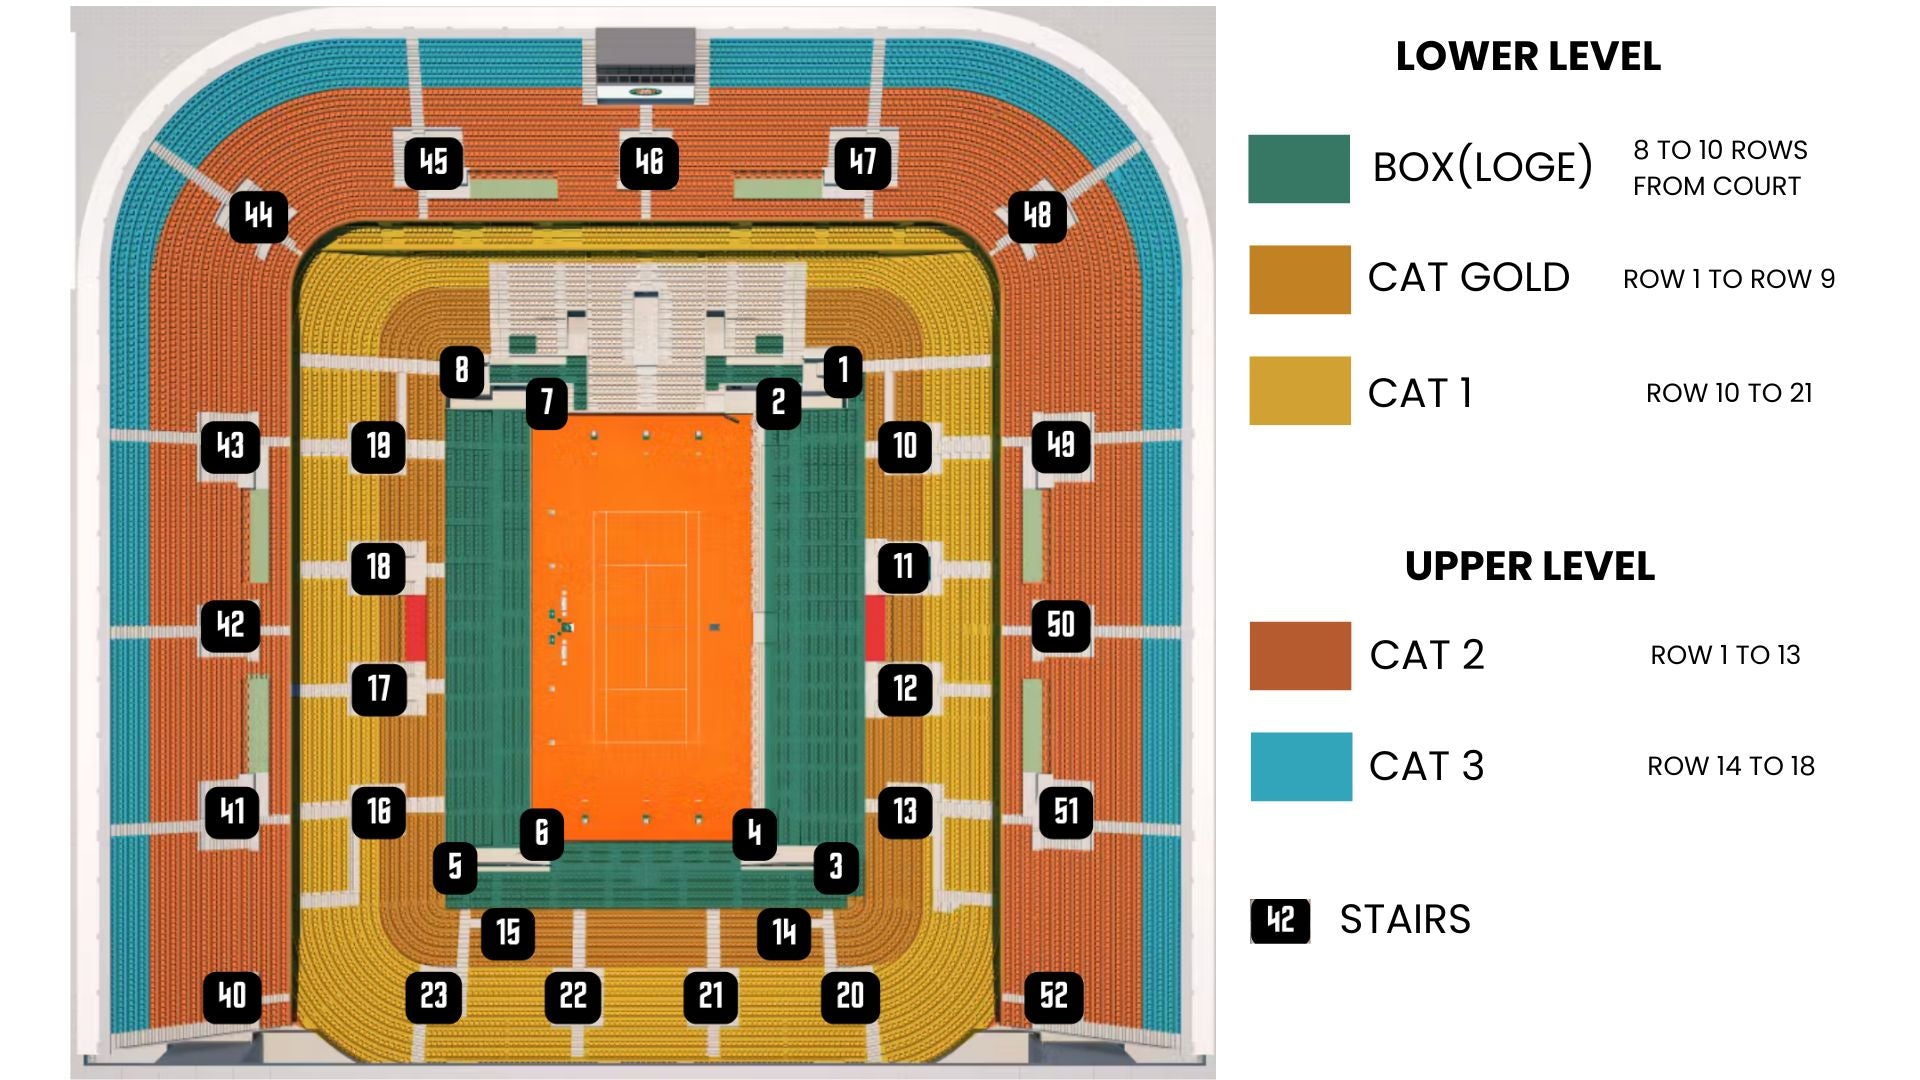 French Open Tickets 5/26/2024 - Sunday Day Session - Philippe Chatrier (Center Court)